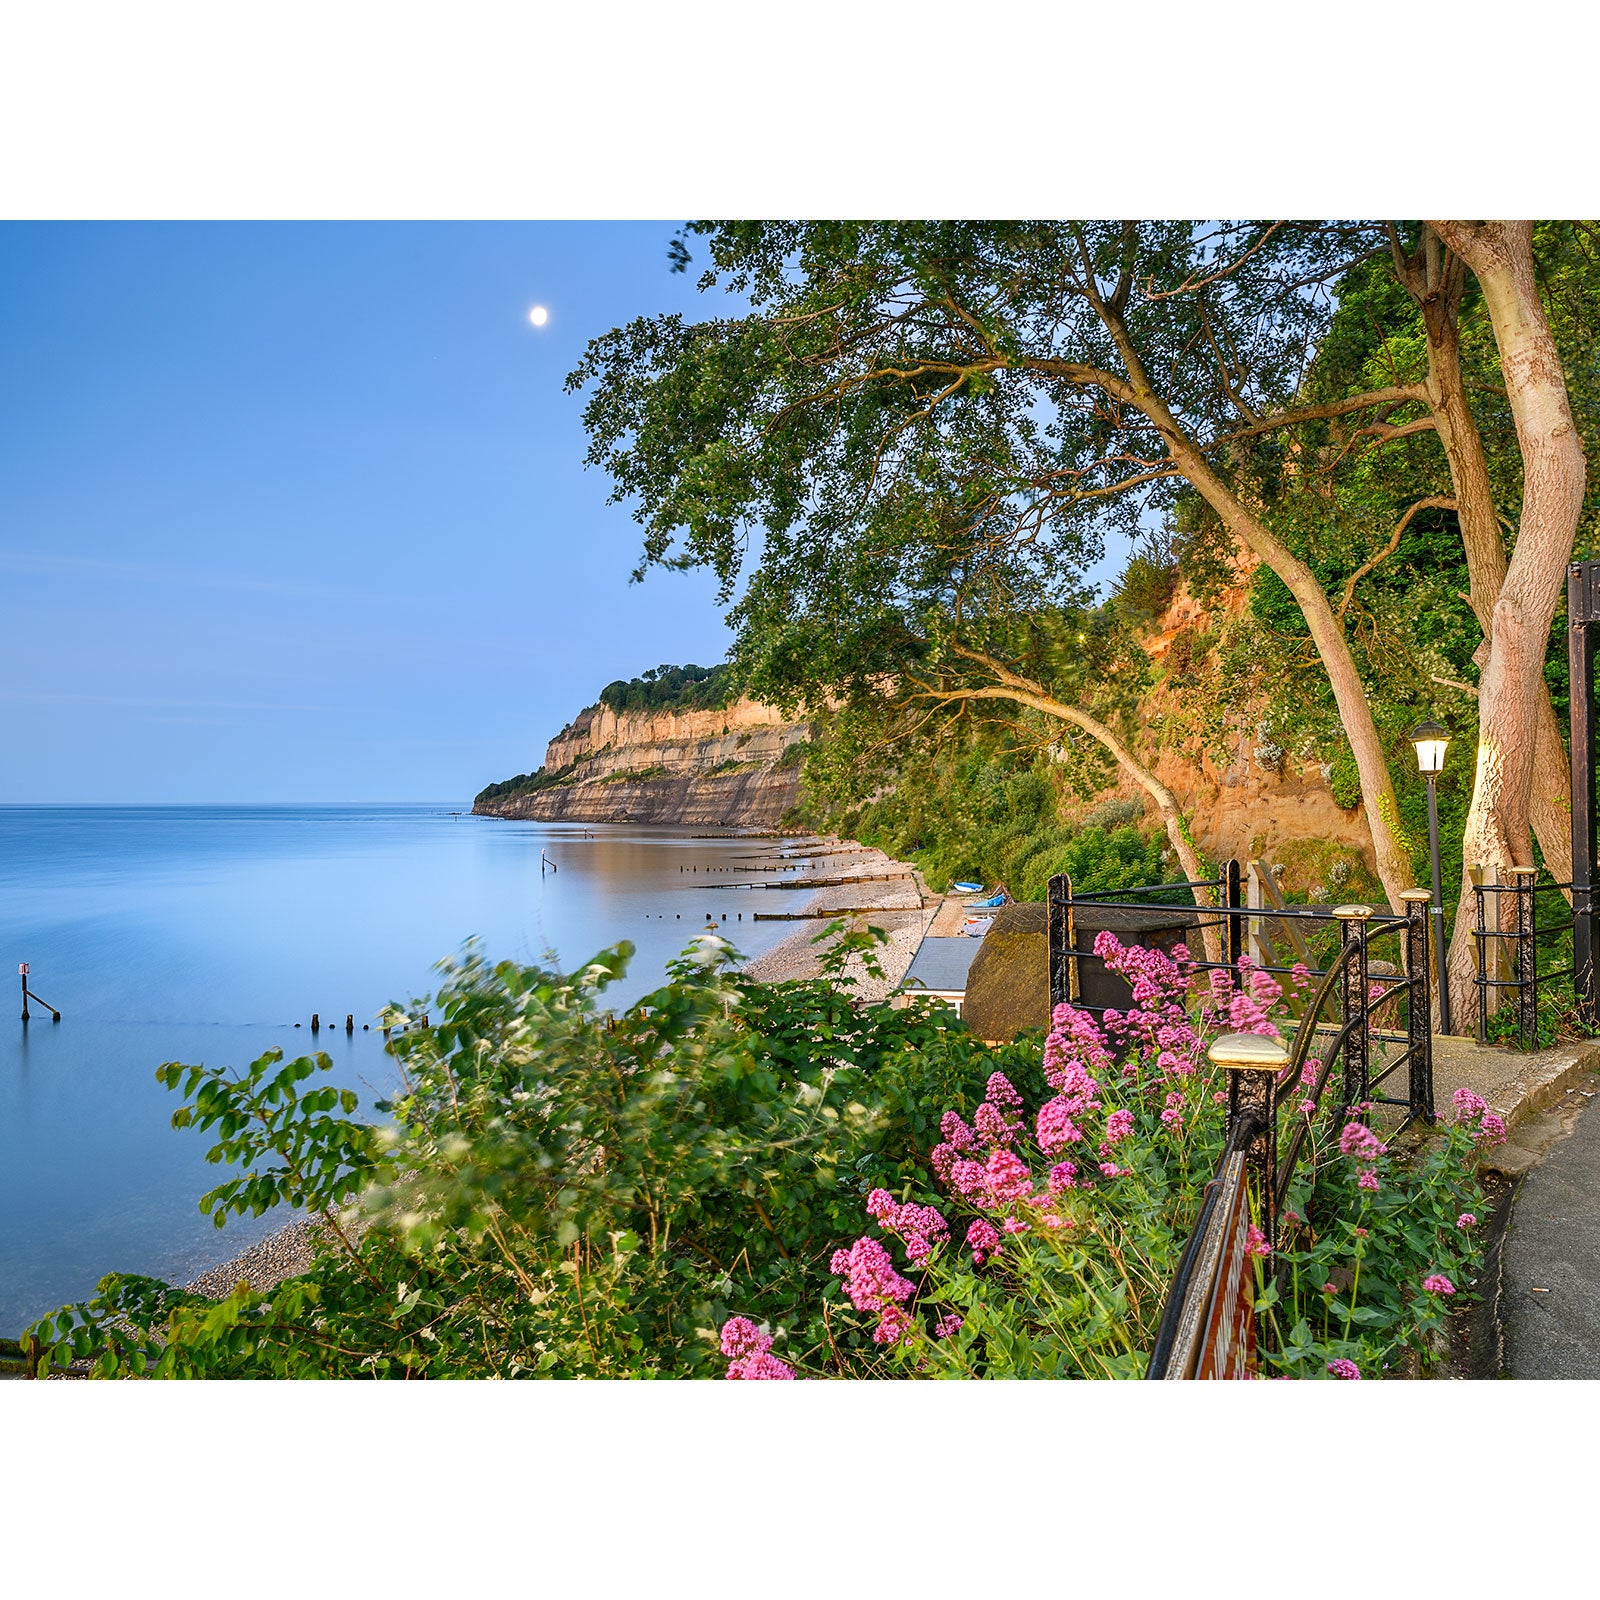 Tranquil coastal scene at twilight with a full moon over calm waters, framed by foliage and flowers, with a serene cliffside on Shanklin Beach in the background captured by Available Light Photography.